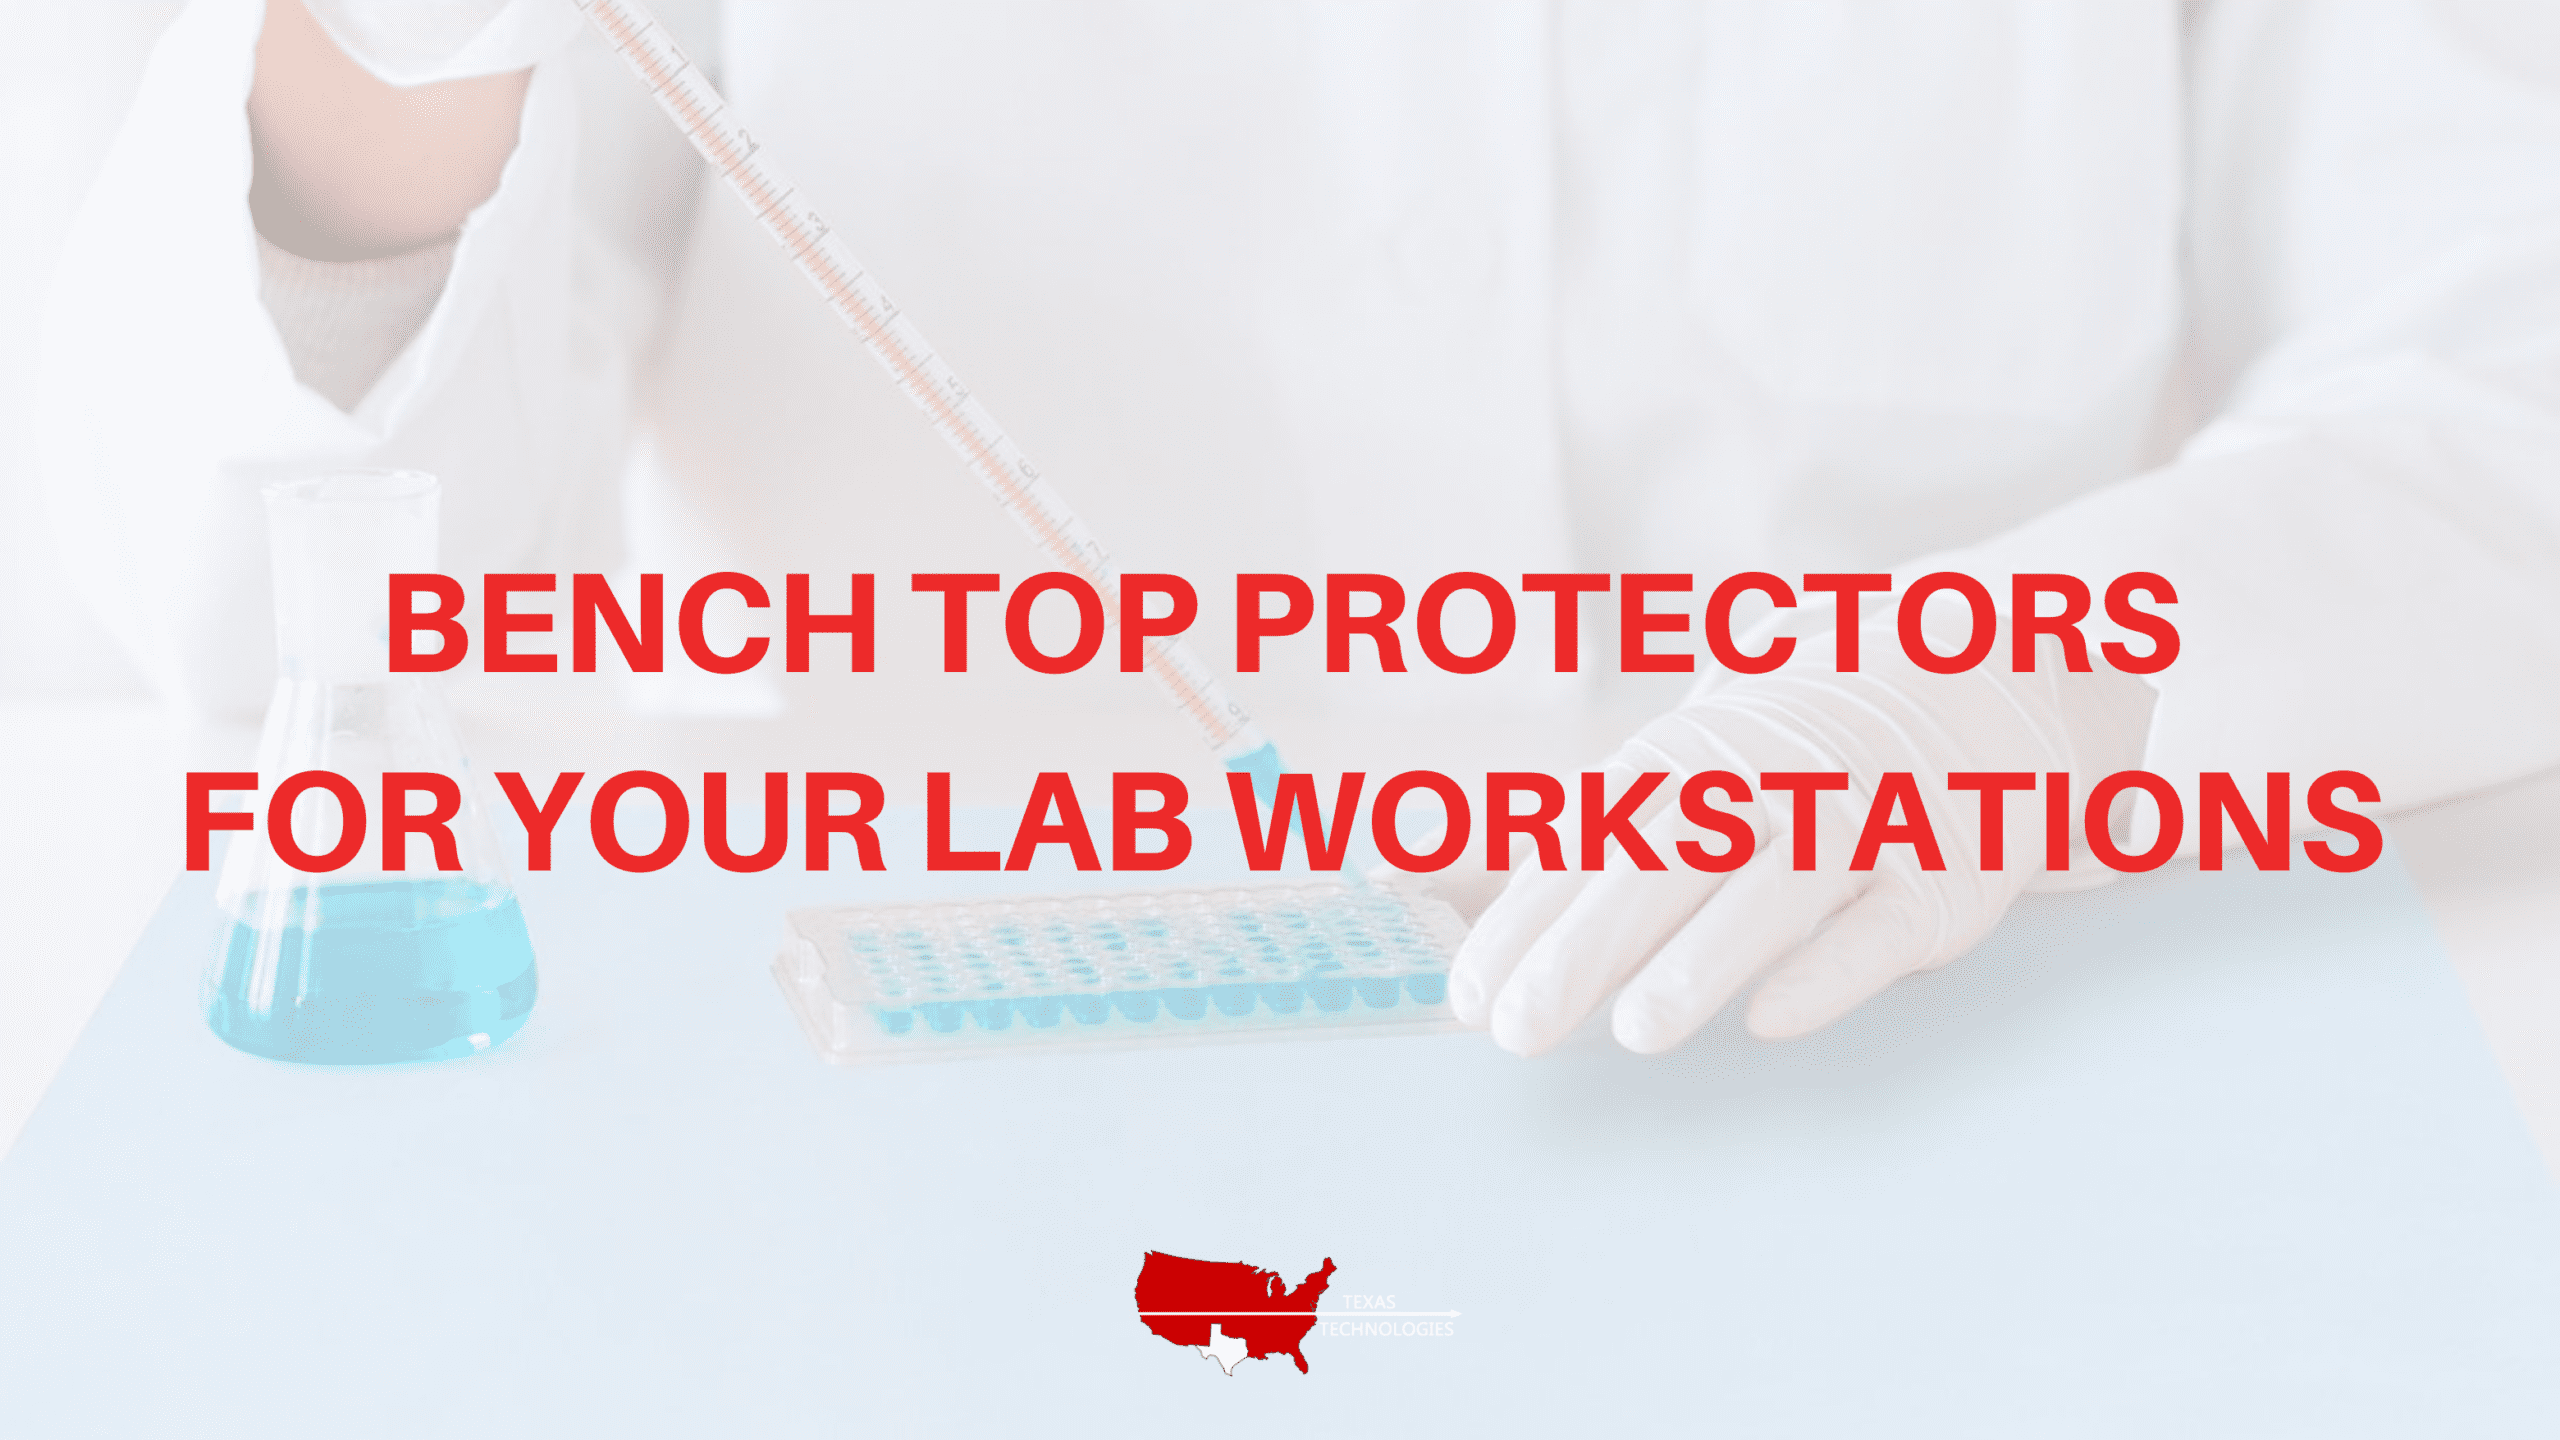 Bench Top Protectors for Your Lab Workstations